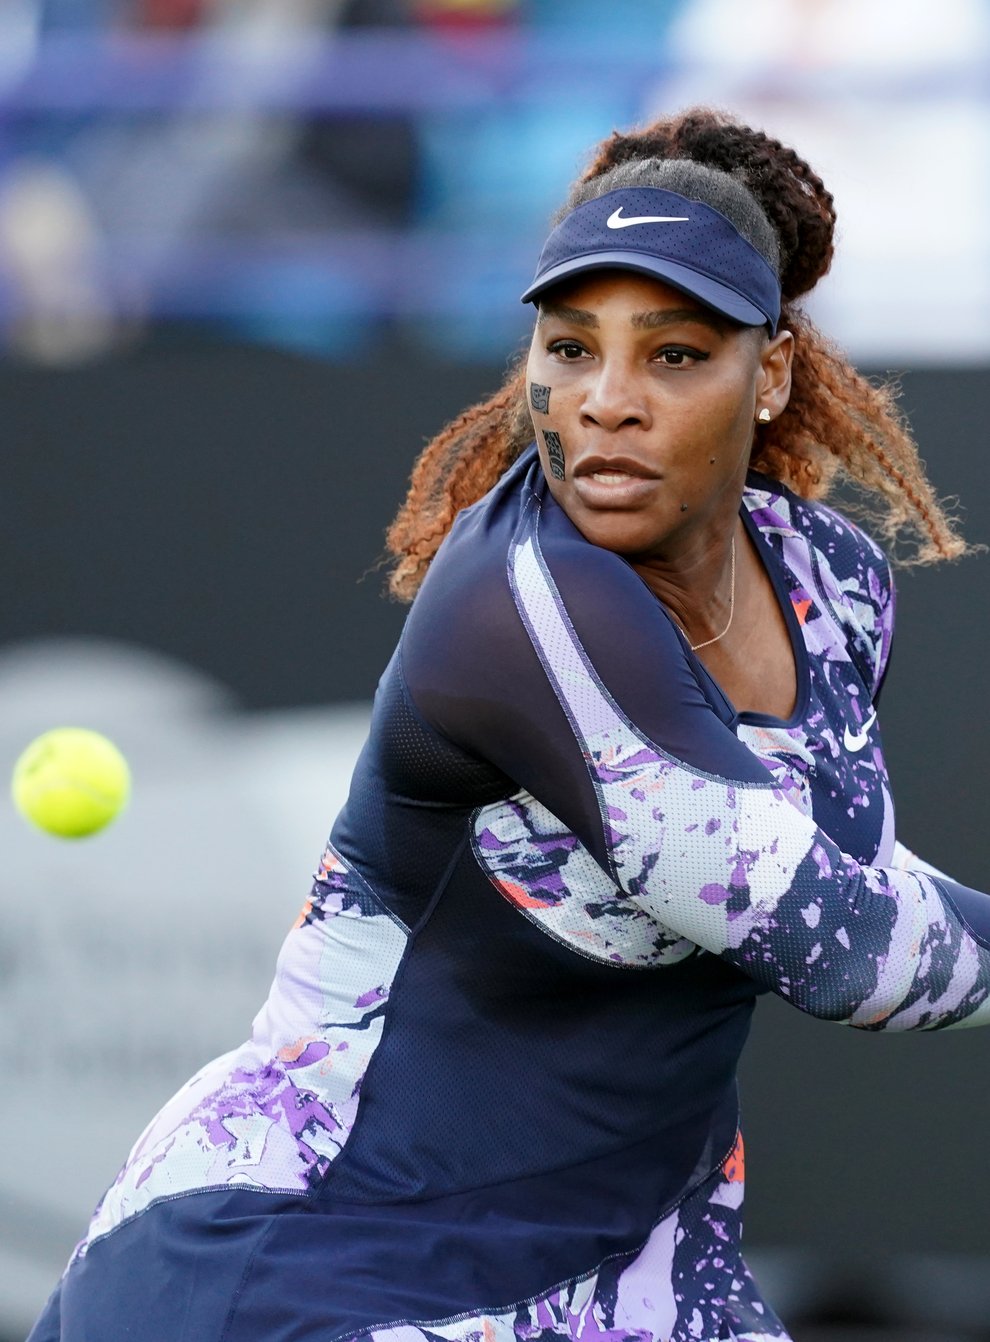 Serena Williams has lost in the second round in Toronto in her first defeat since announcing her imminent retirement from tennis (Gareth Fuller/PA)